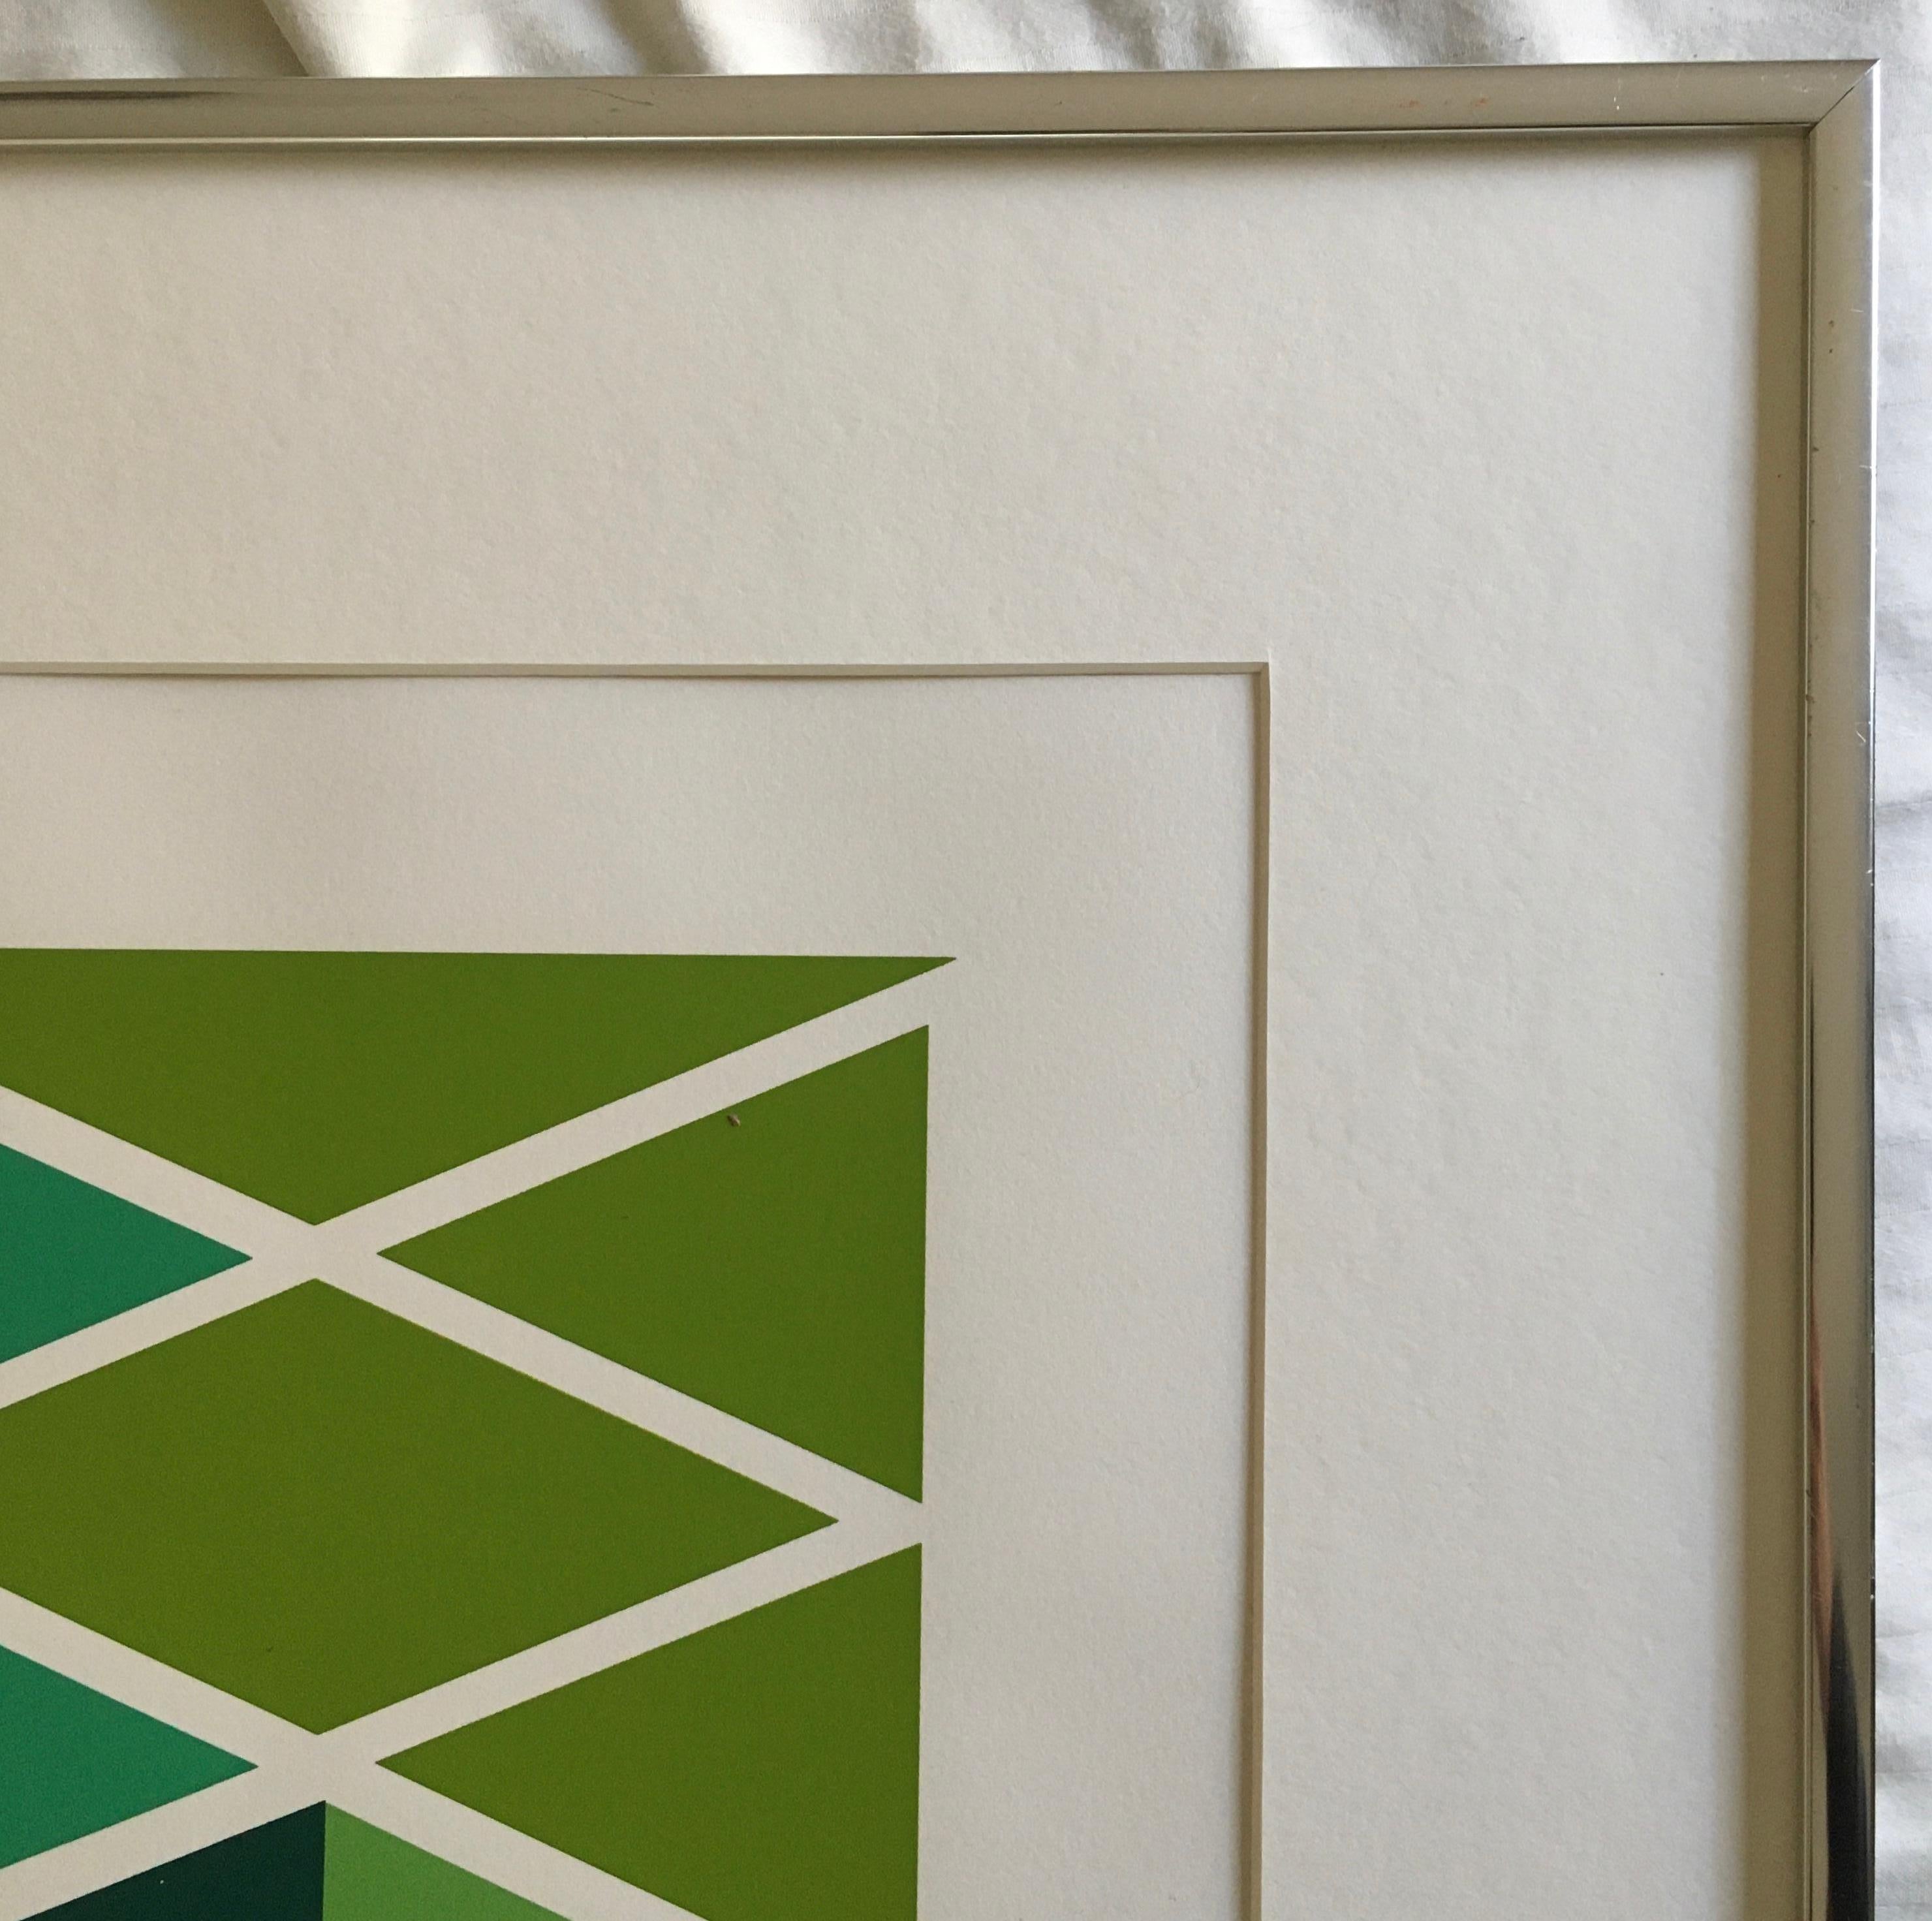 Larry Zox 'Double Green' Signed Limited Edition Geometric Abstract Print For Sale 3